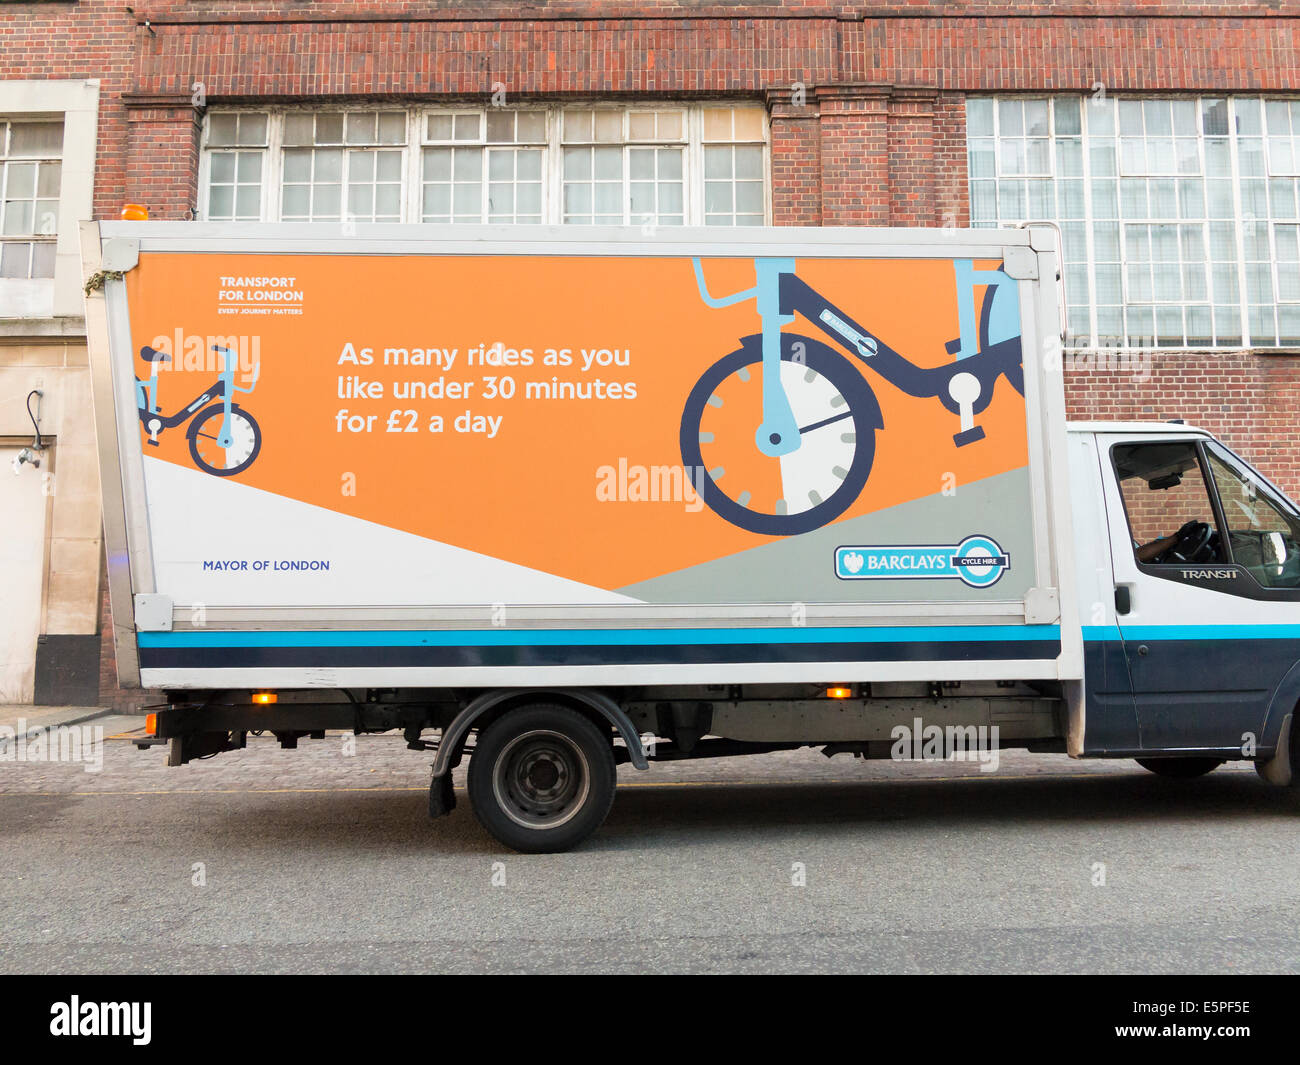 Barclays bike hire truck used for moving cycles between docking stations, London, UK Stock Photo